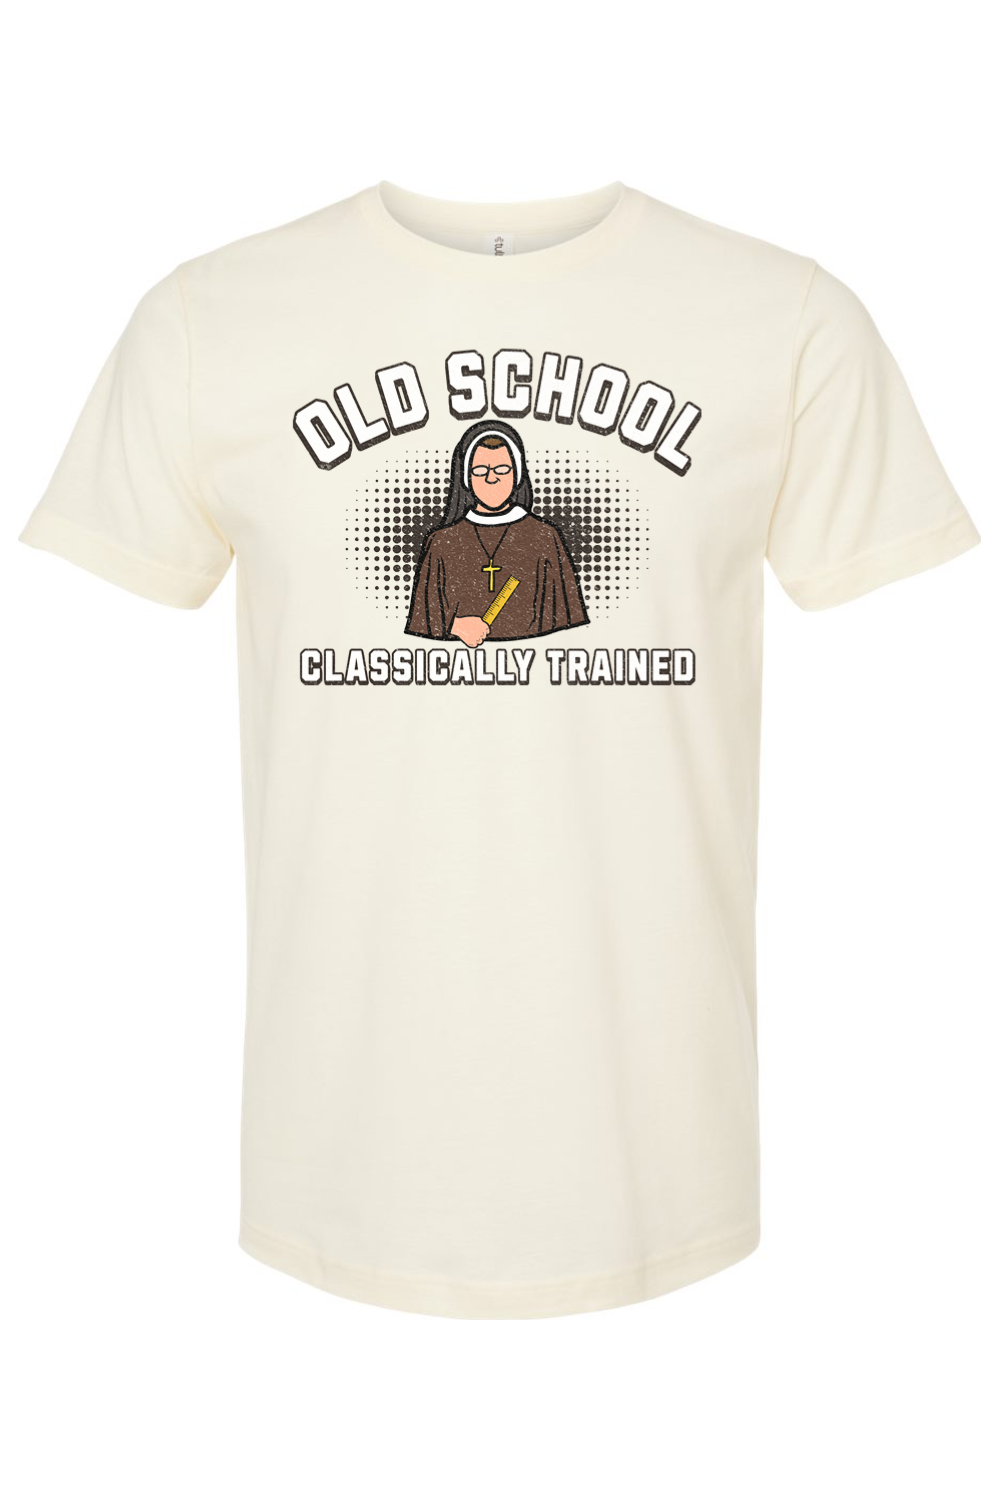 Old School - Classically Trained - T-Shirt